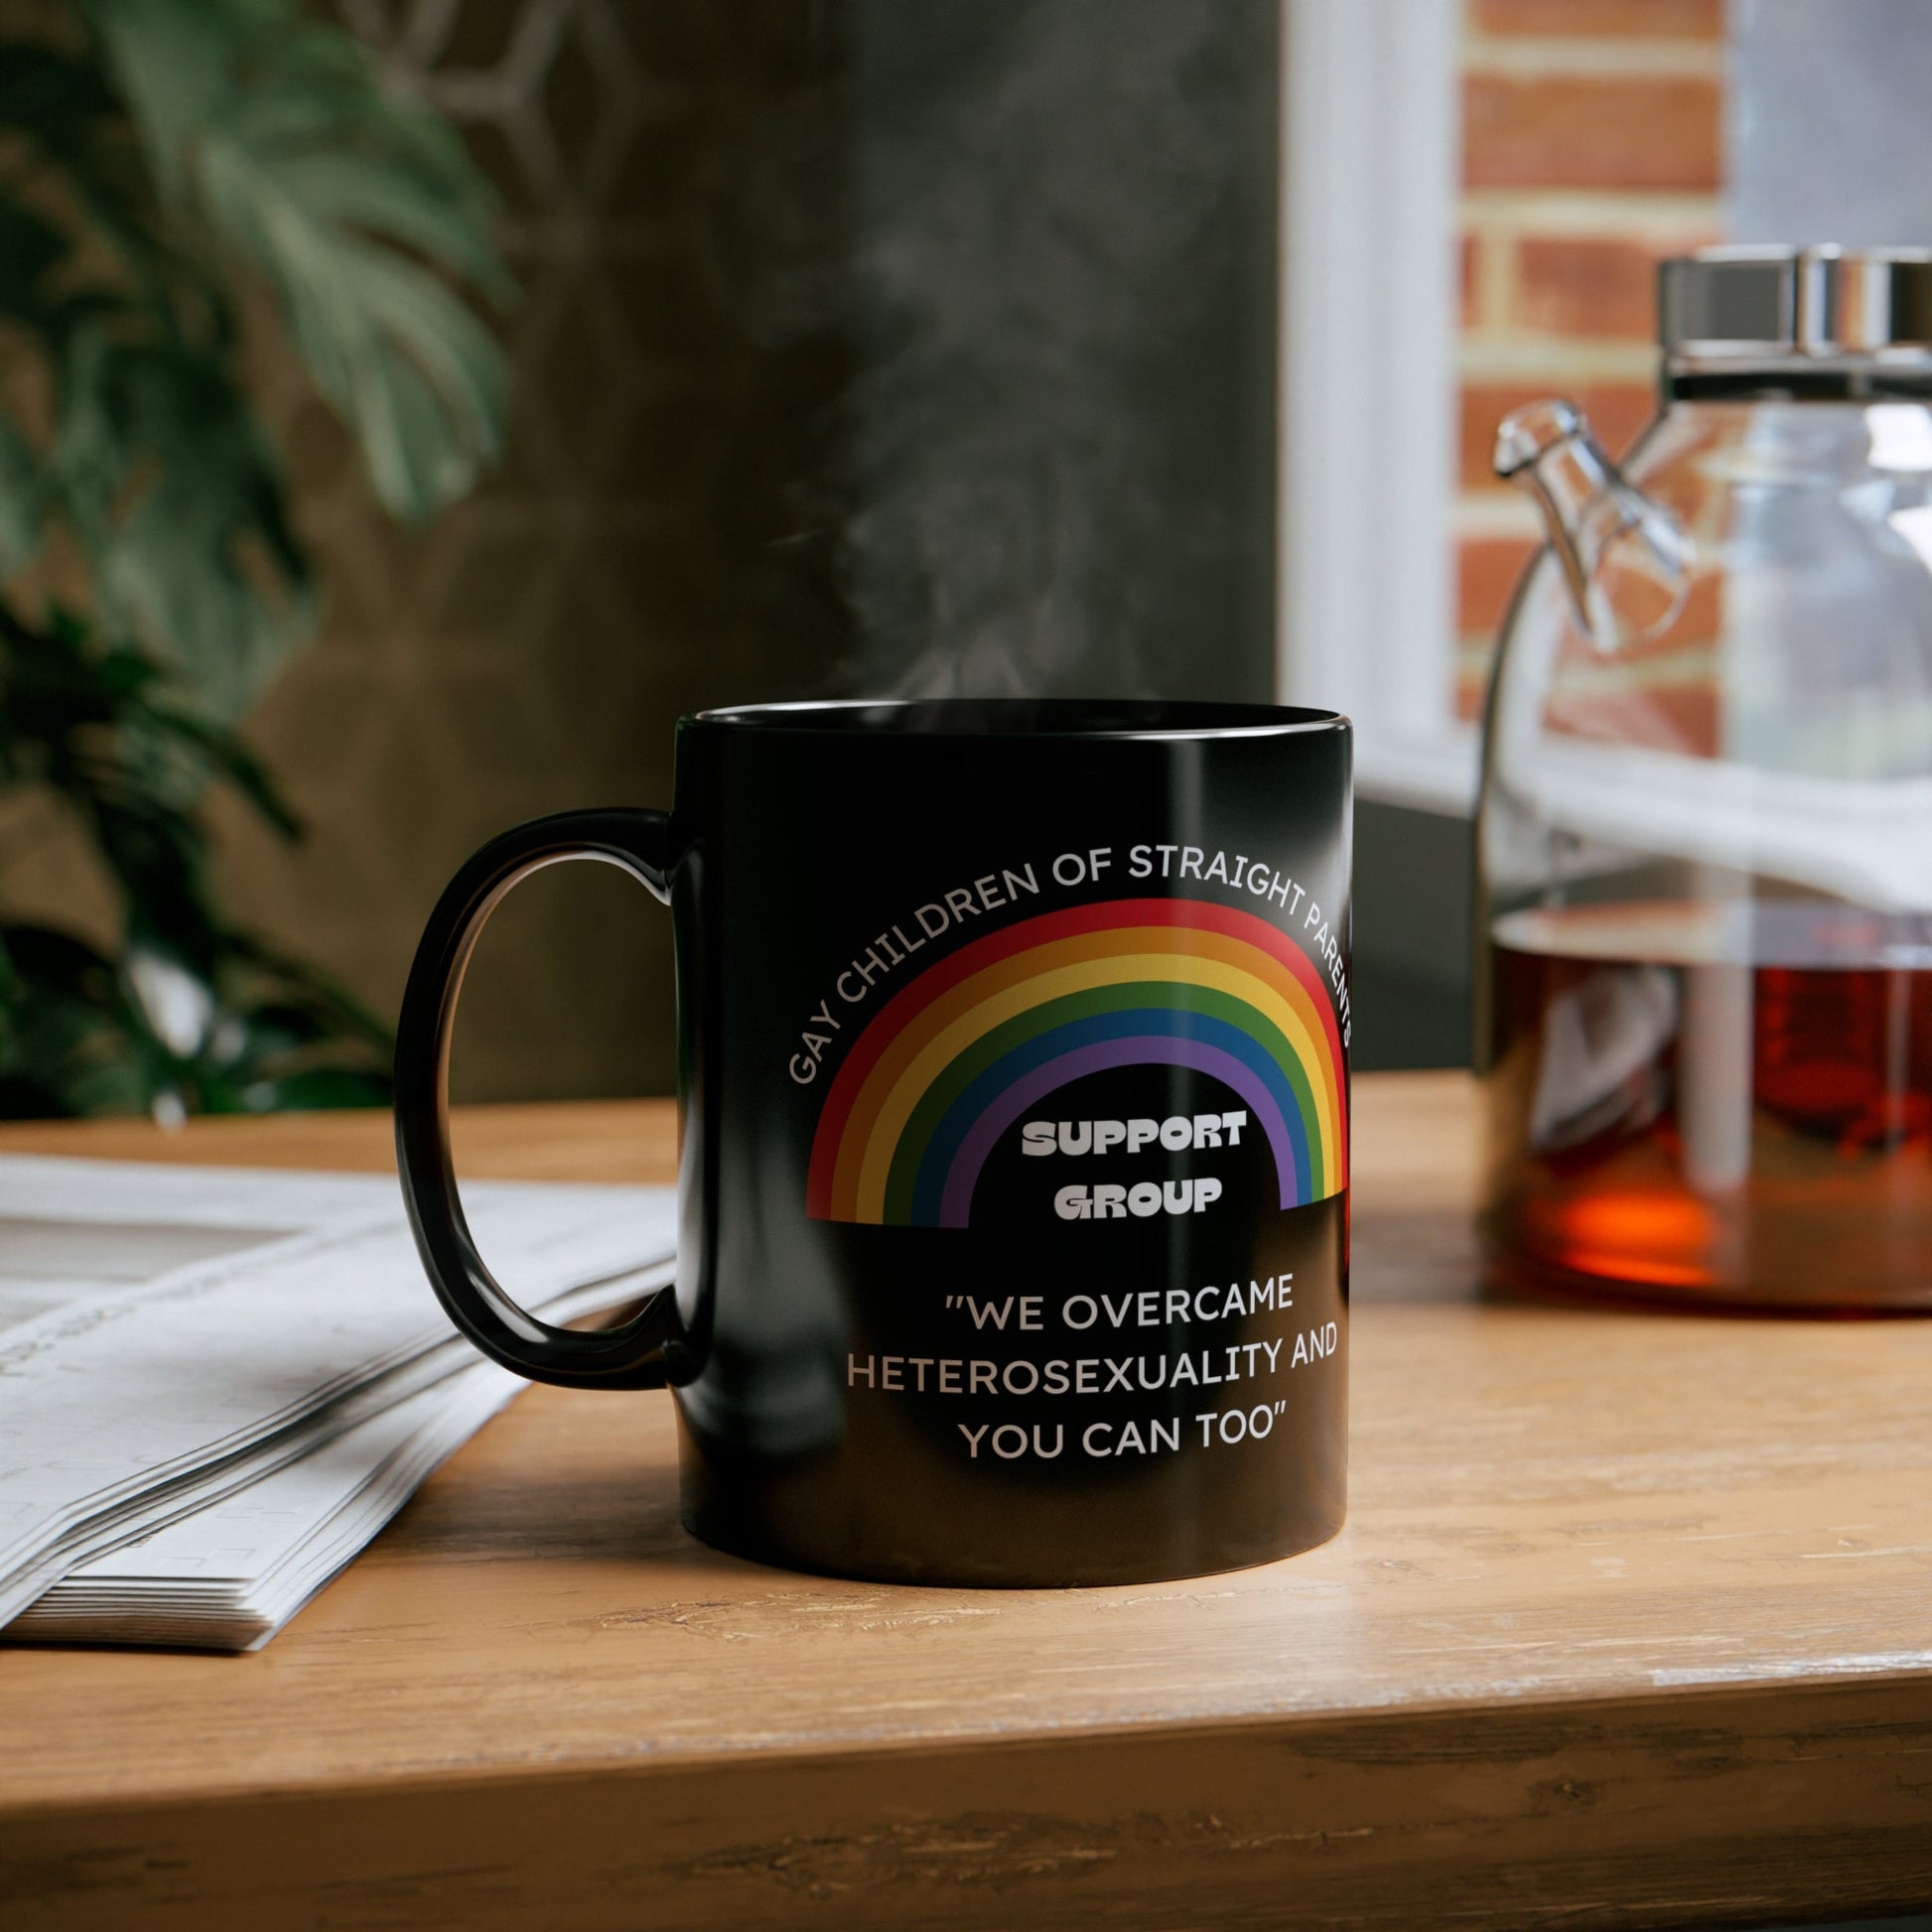 Gay Children of Straight Parents Support Group Mug in Black